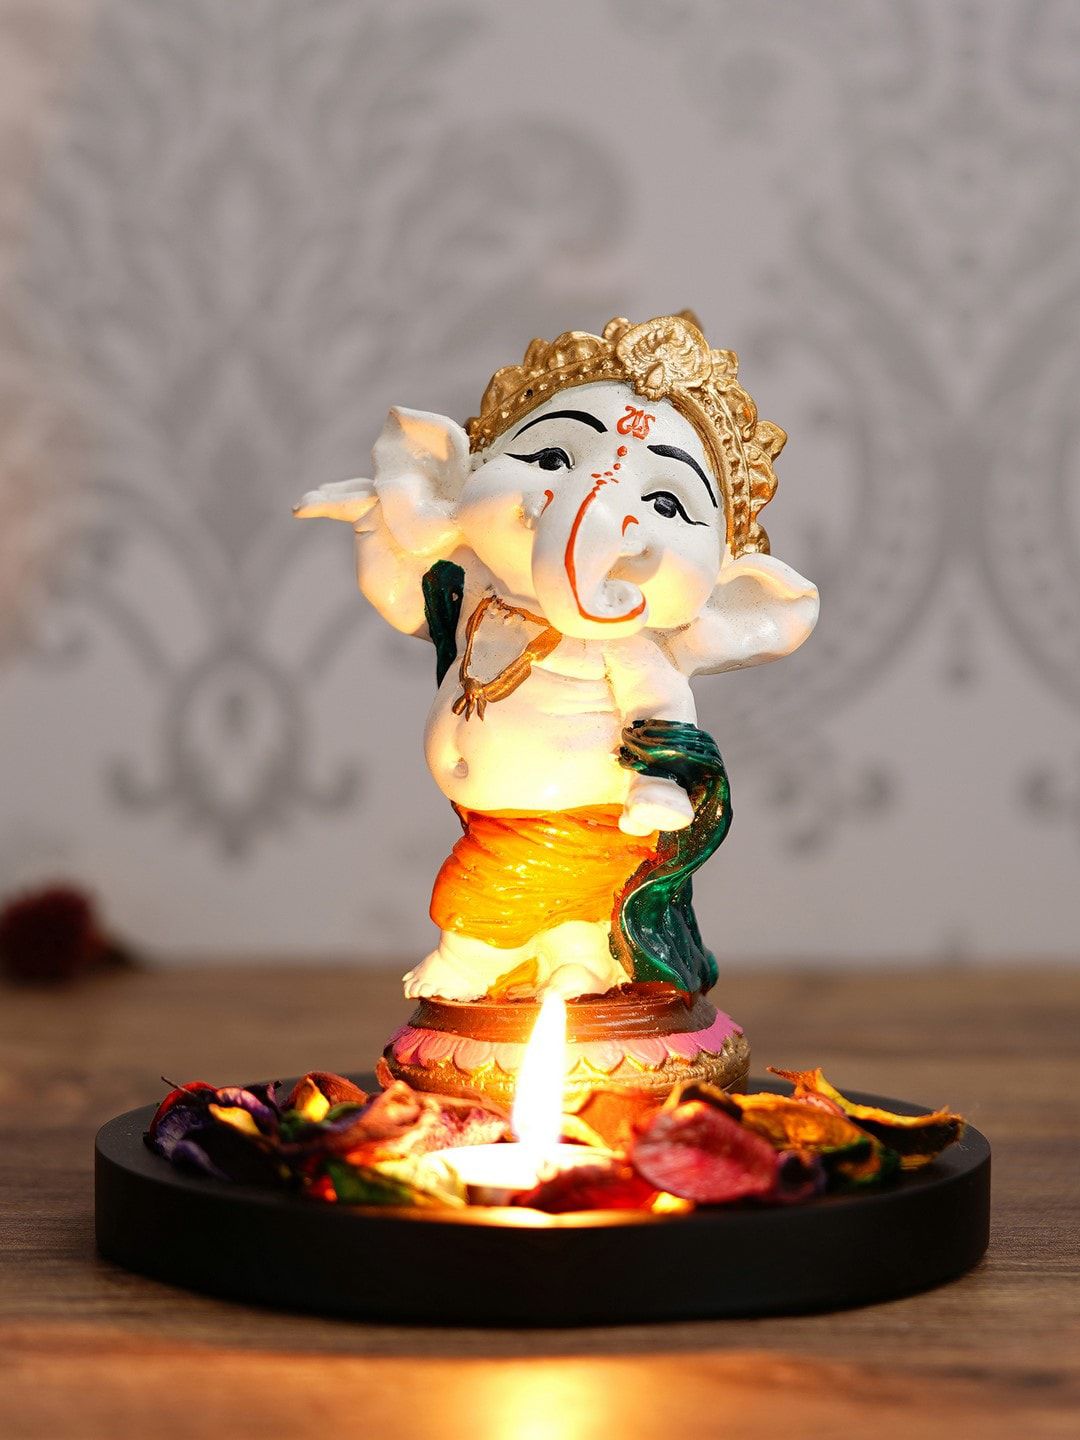 eCraftIndia Off-White & Orange Lord Ganesha Dancing Avatar Showpiece With Wooden Base, Petals & Tealight Price in India